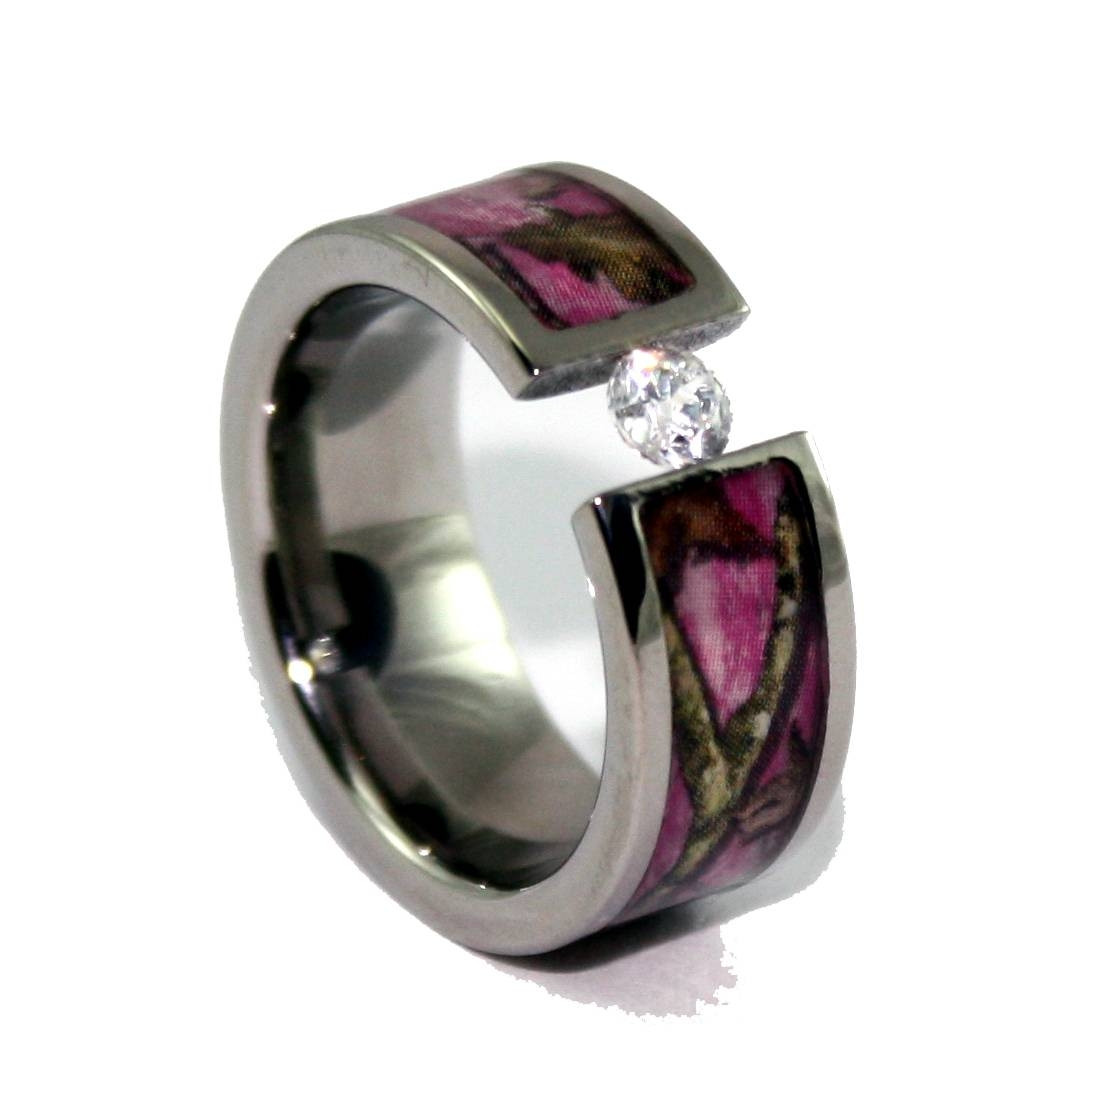 Camo Wedding Rings His And Hers
 2019 Popular His And Hers Camo Wedding Bands